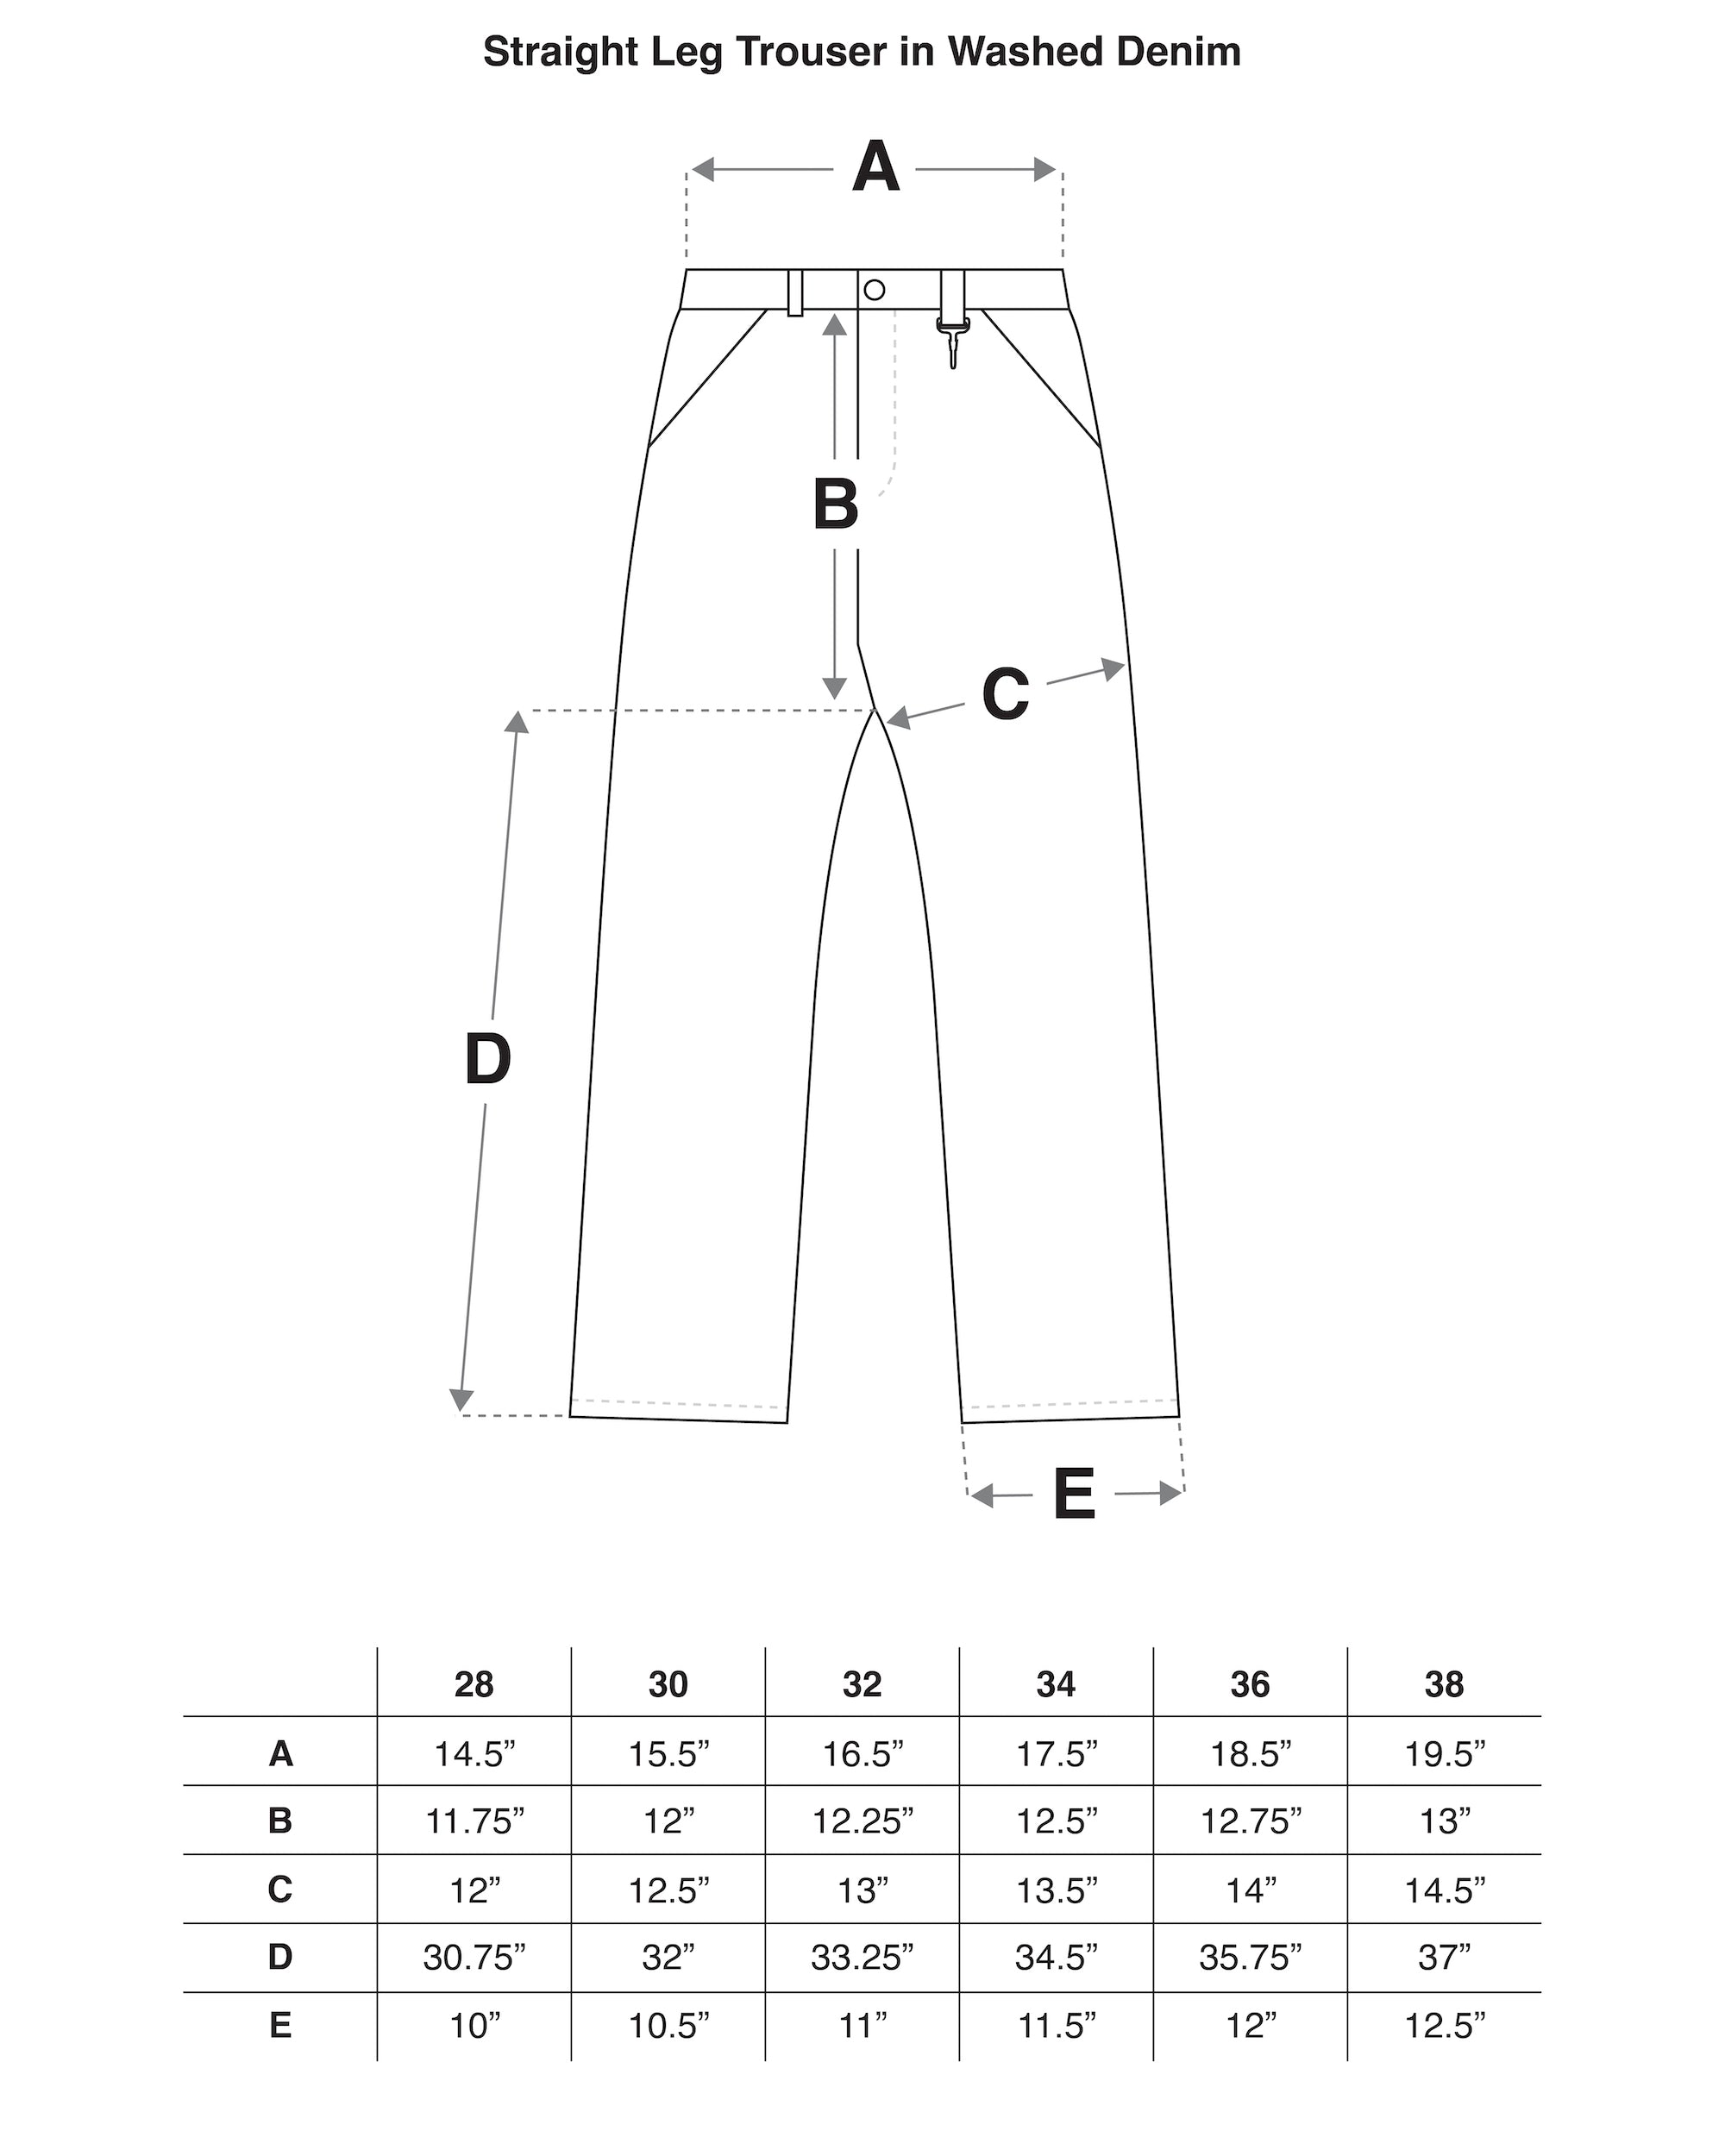 Straight Leg Trouser in Washed Denim Size Guide